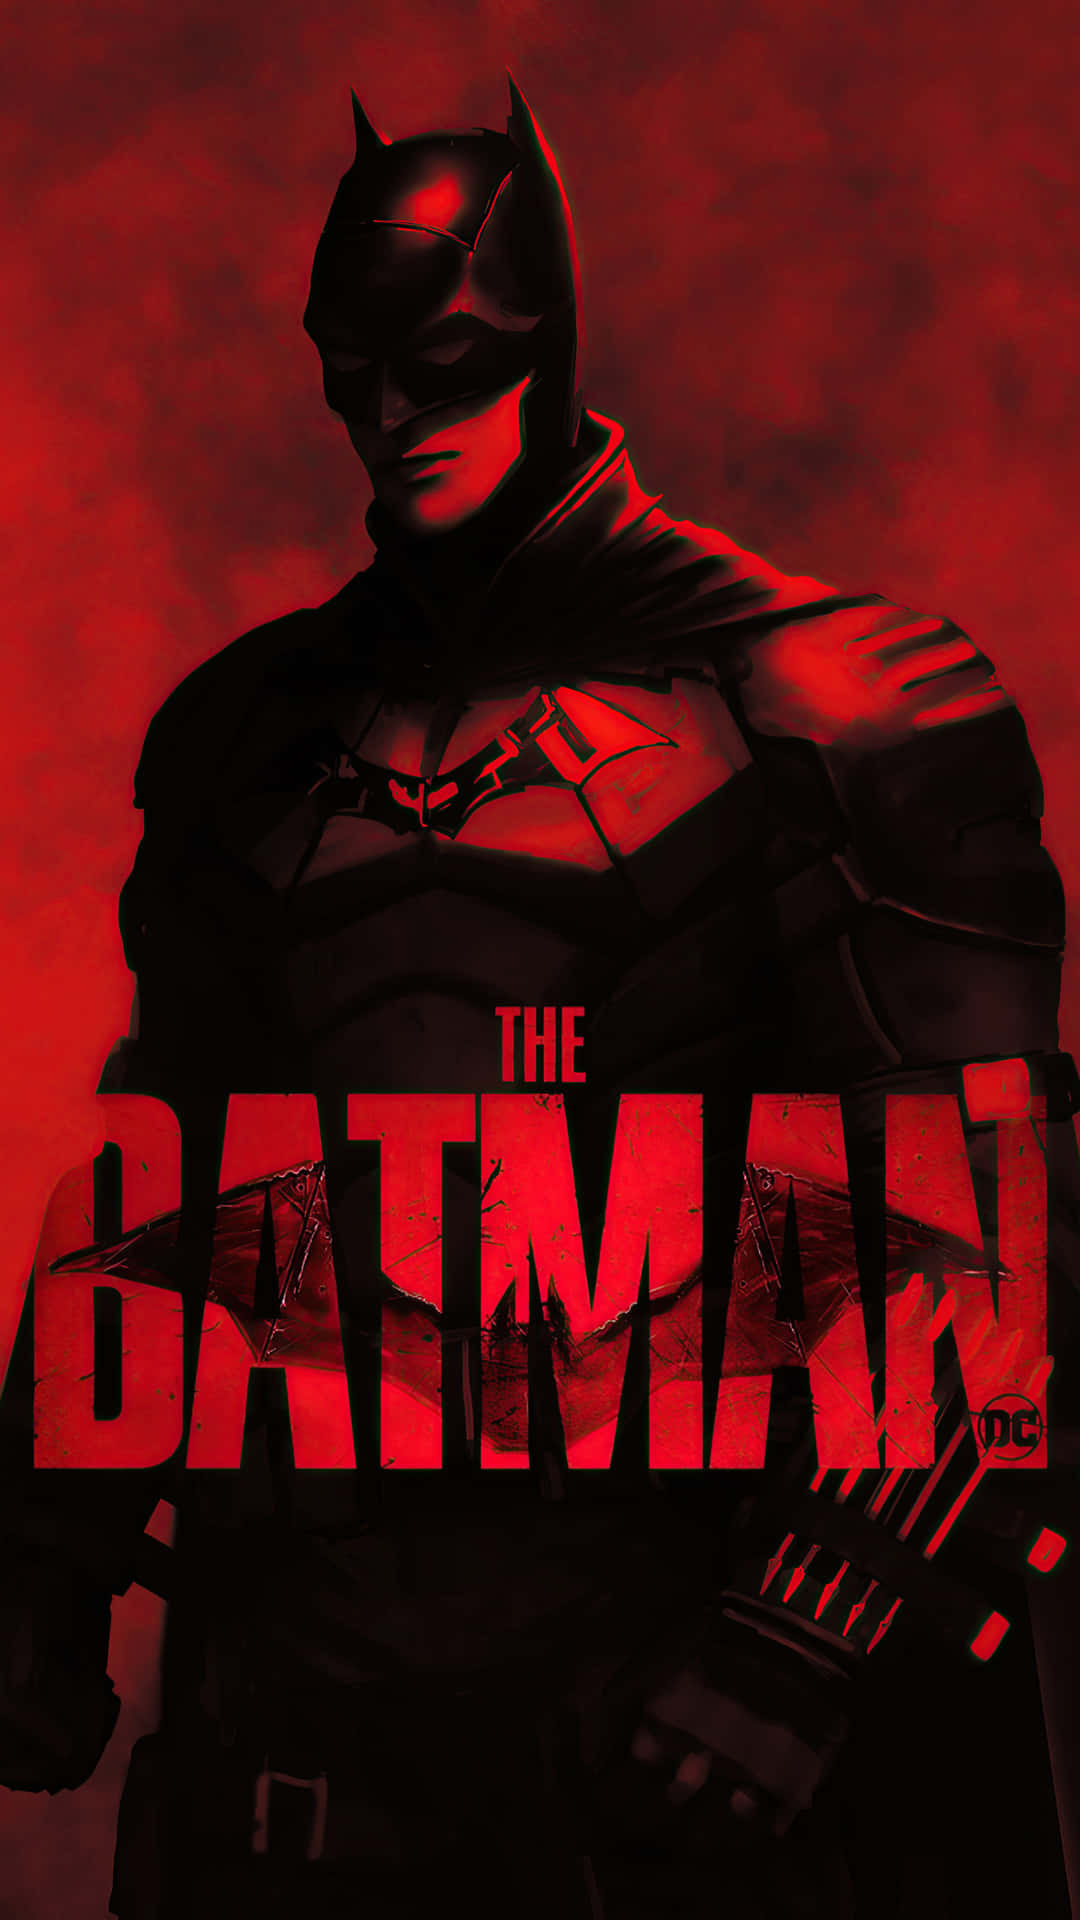 The Batman Movie Poster With Red And Black Colors Wallpaper